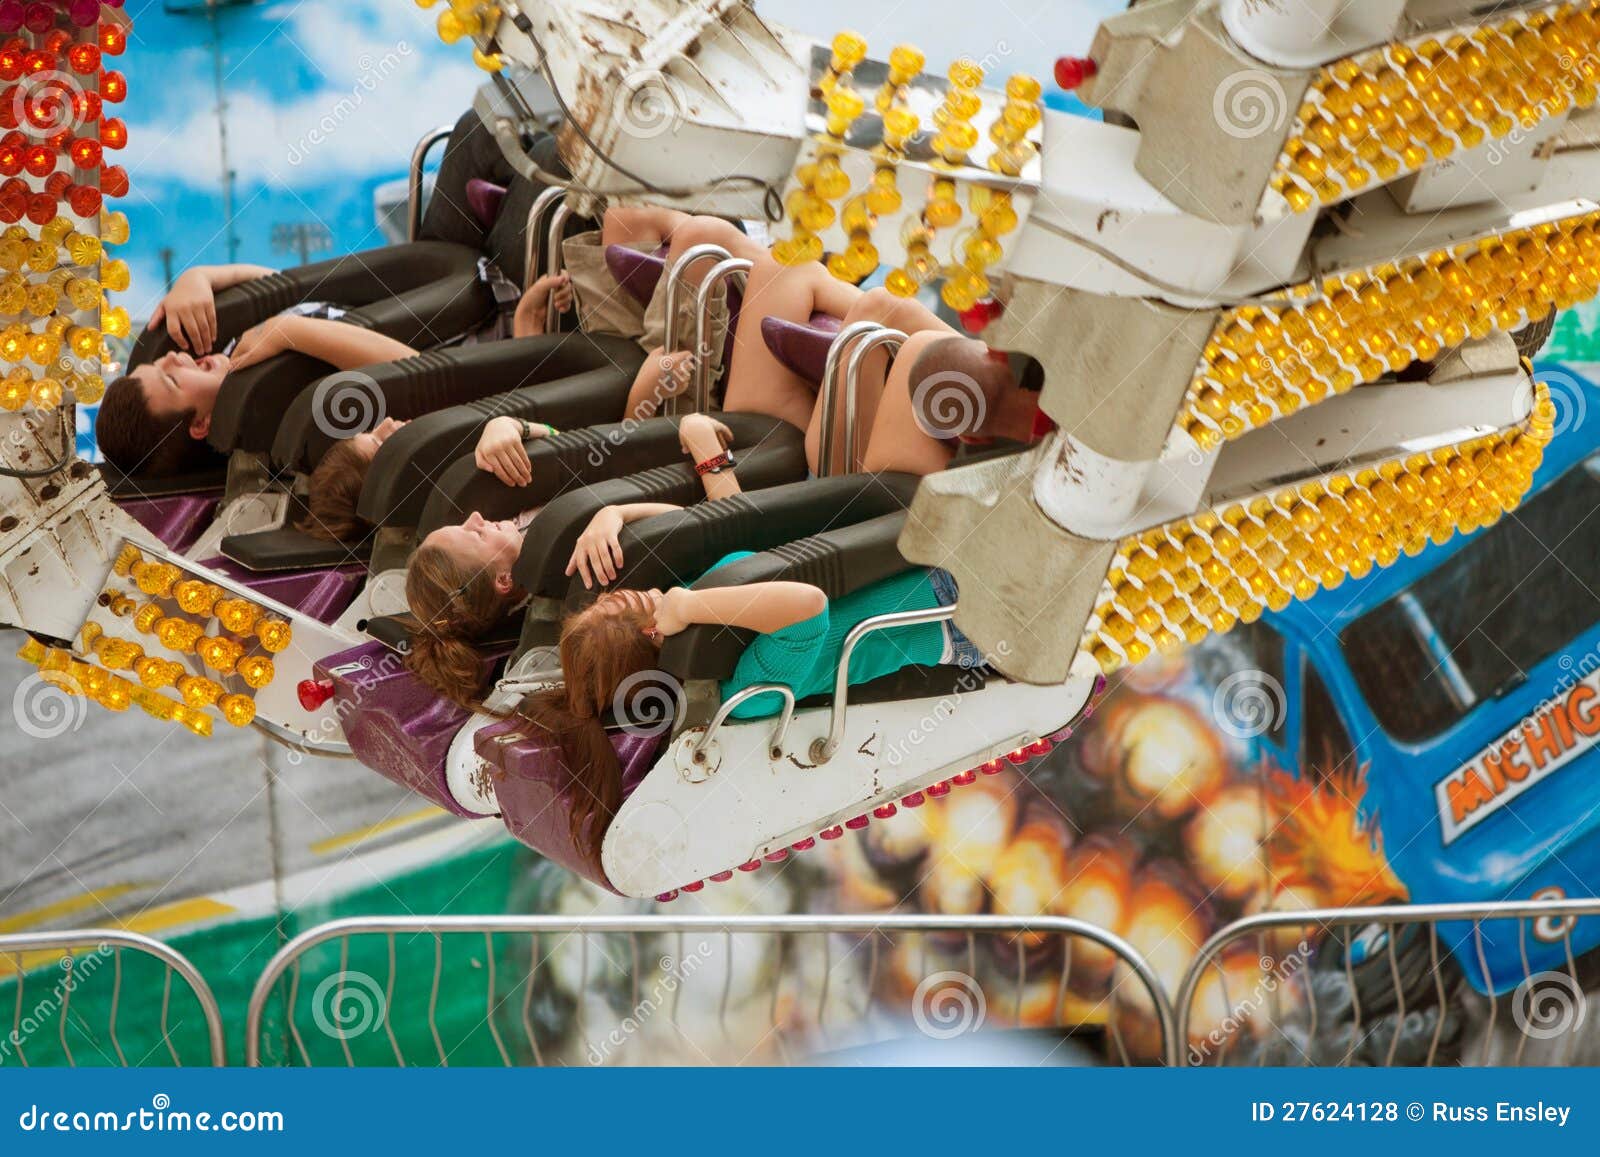 Teens Have Fun On Exciting Carnival Ride Editorial Stock